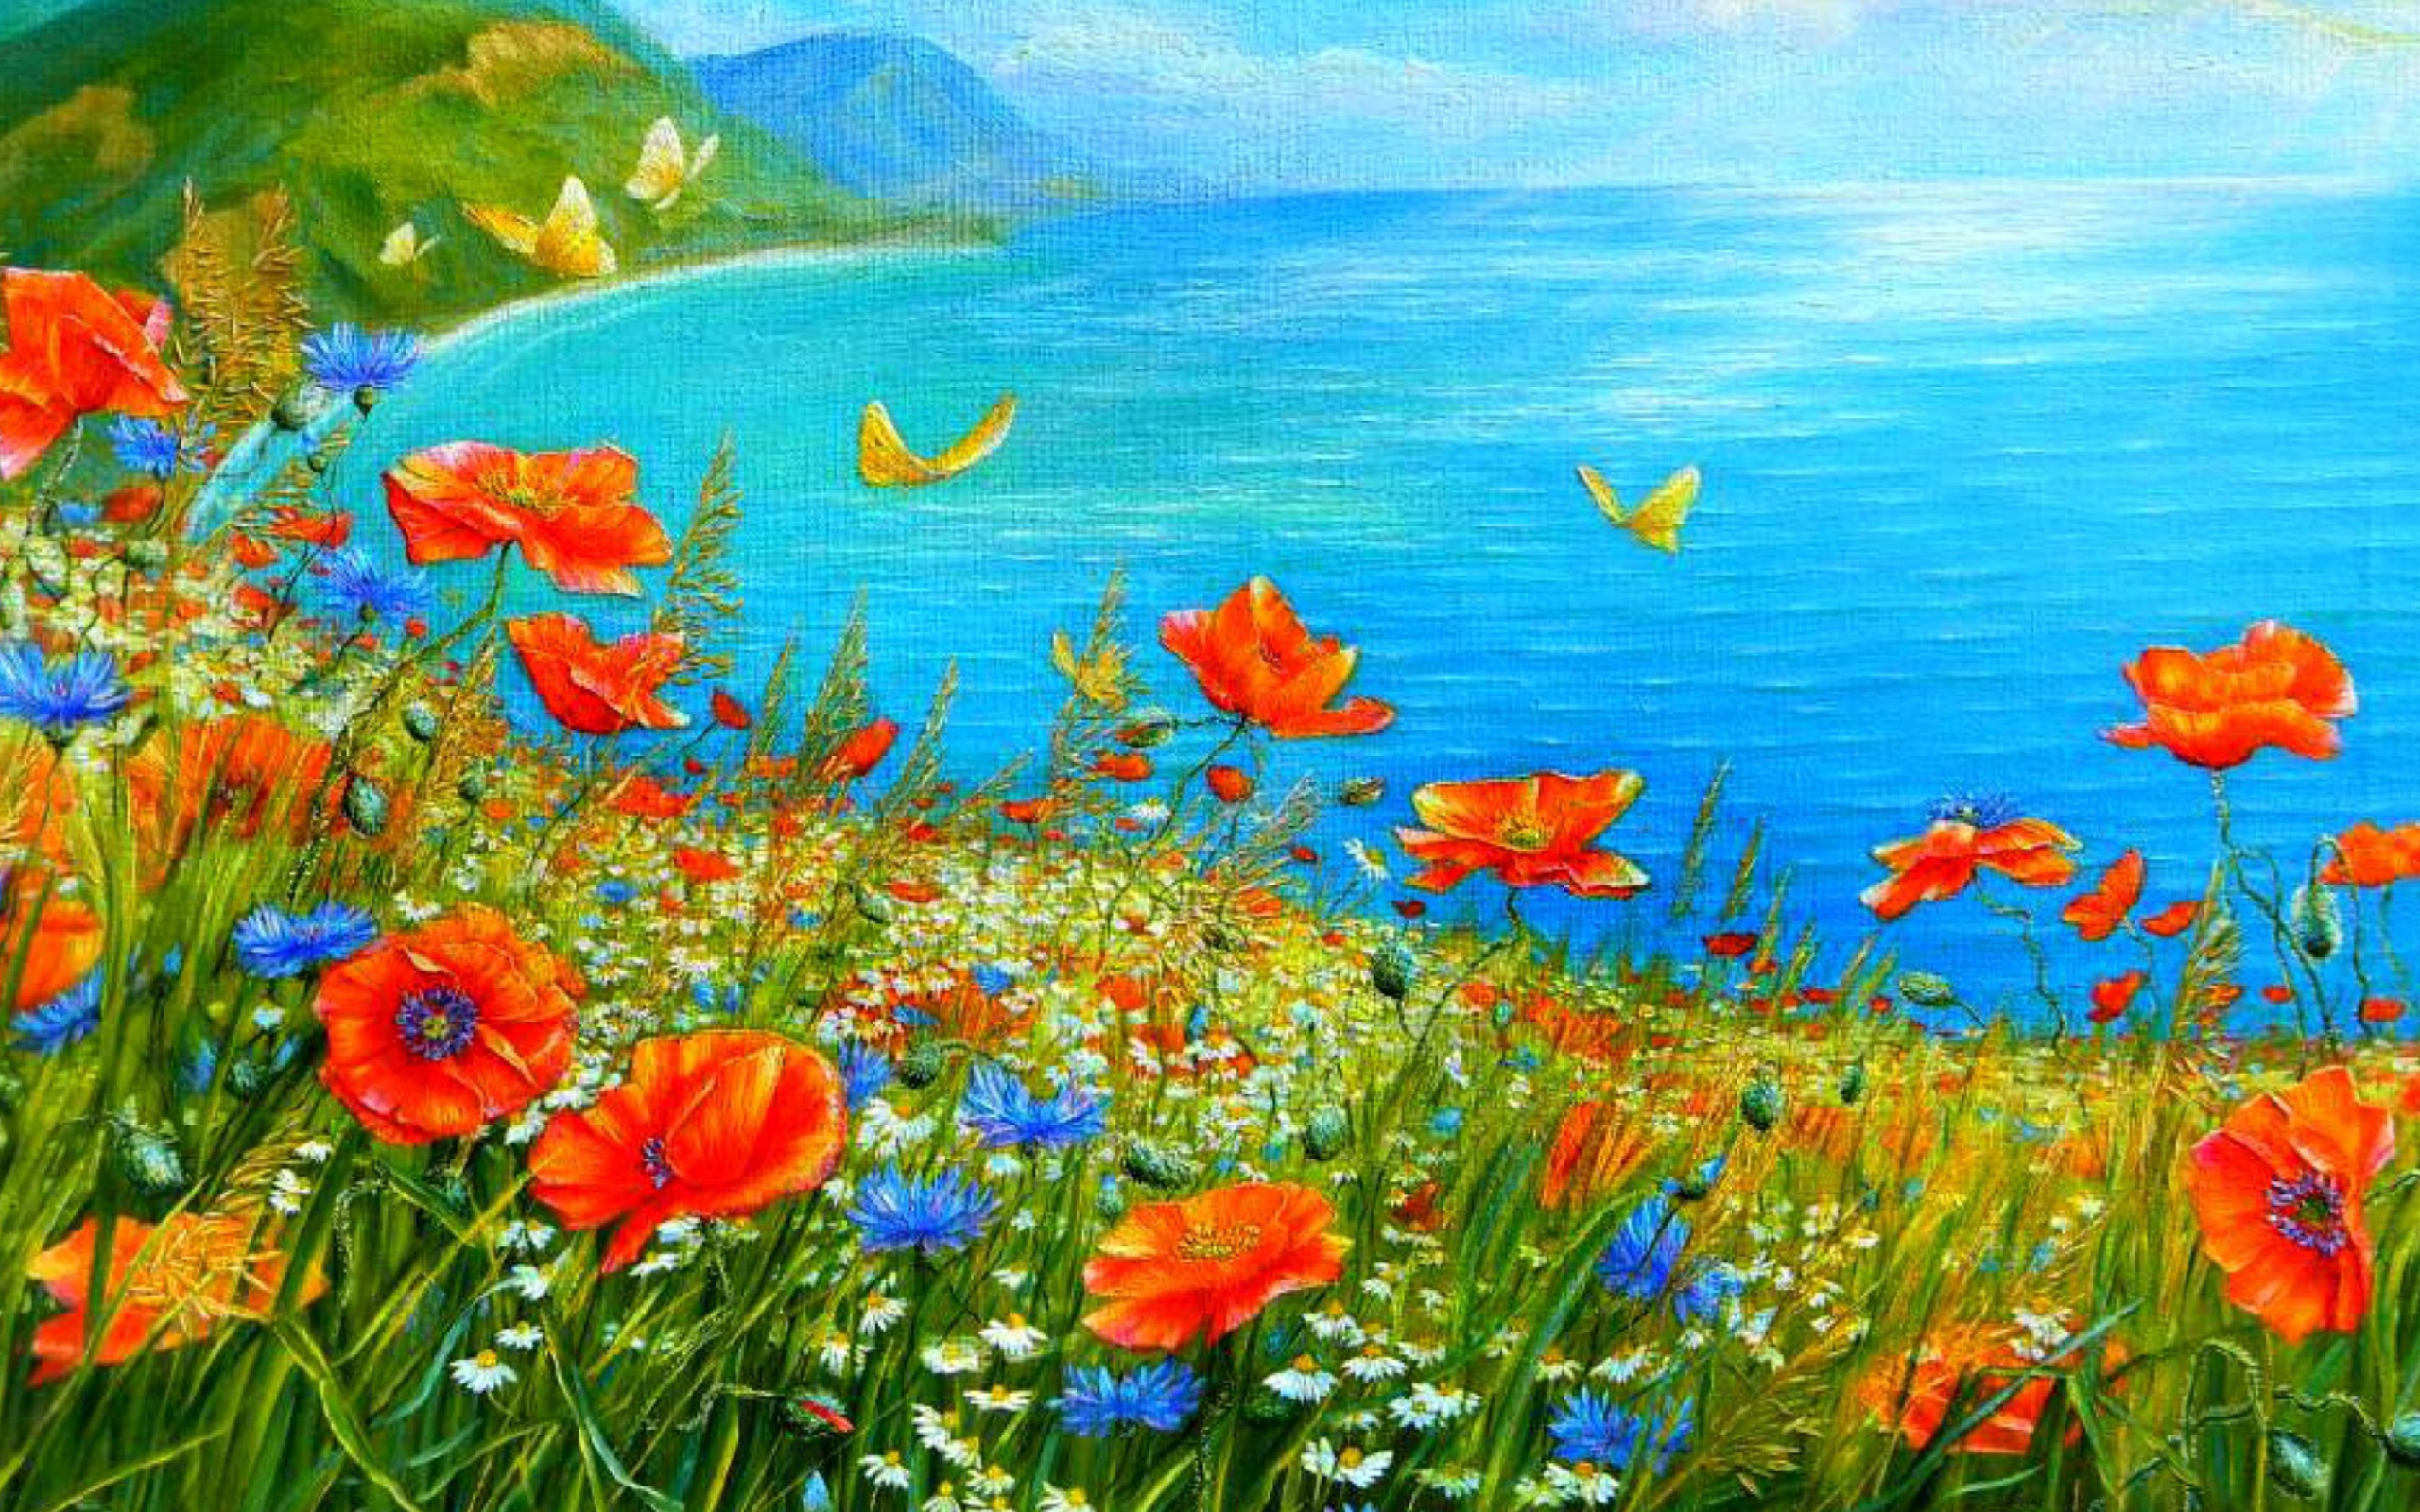 Das Summer Meadow By Sea Painting Wallpaper 2560x1600